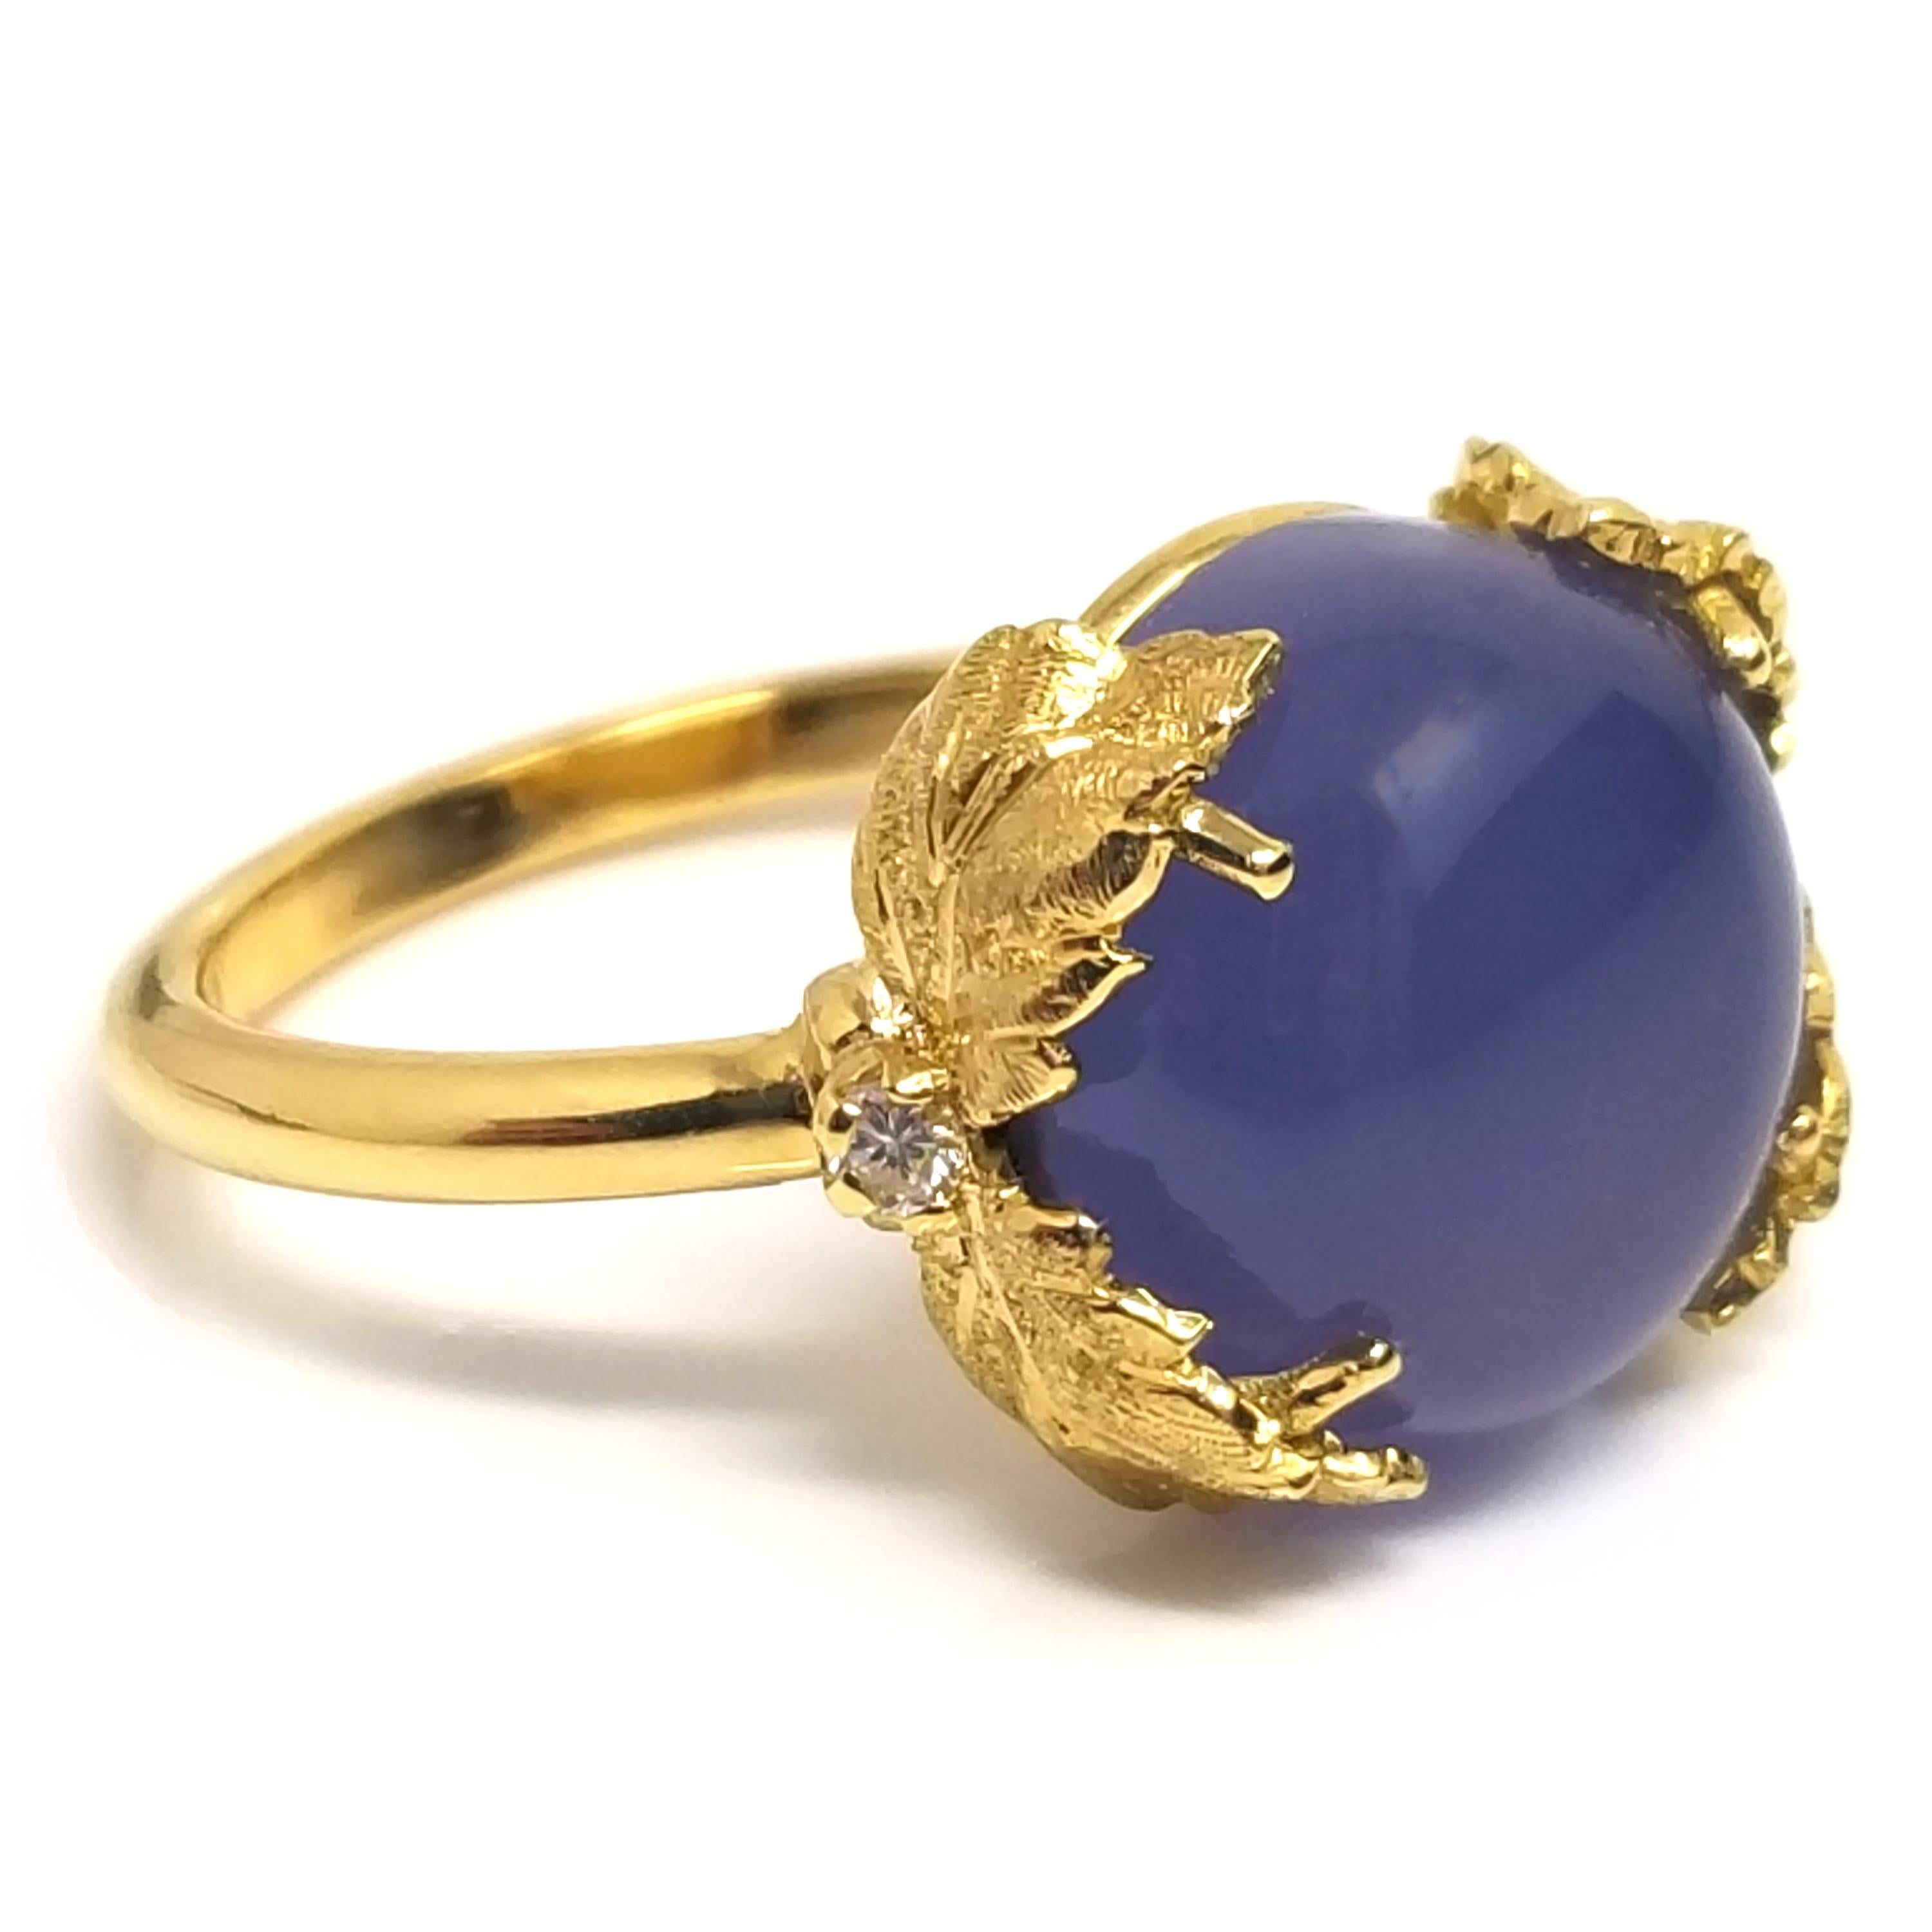 Cabochon 6.28ct Namibian Chalcedony and 18kt Ring, Made in Florence, Italy For Sale